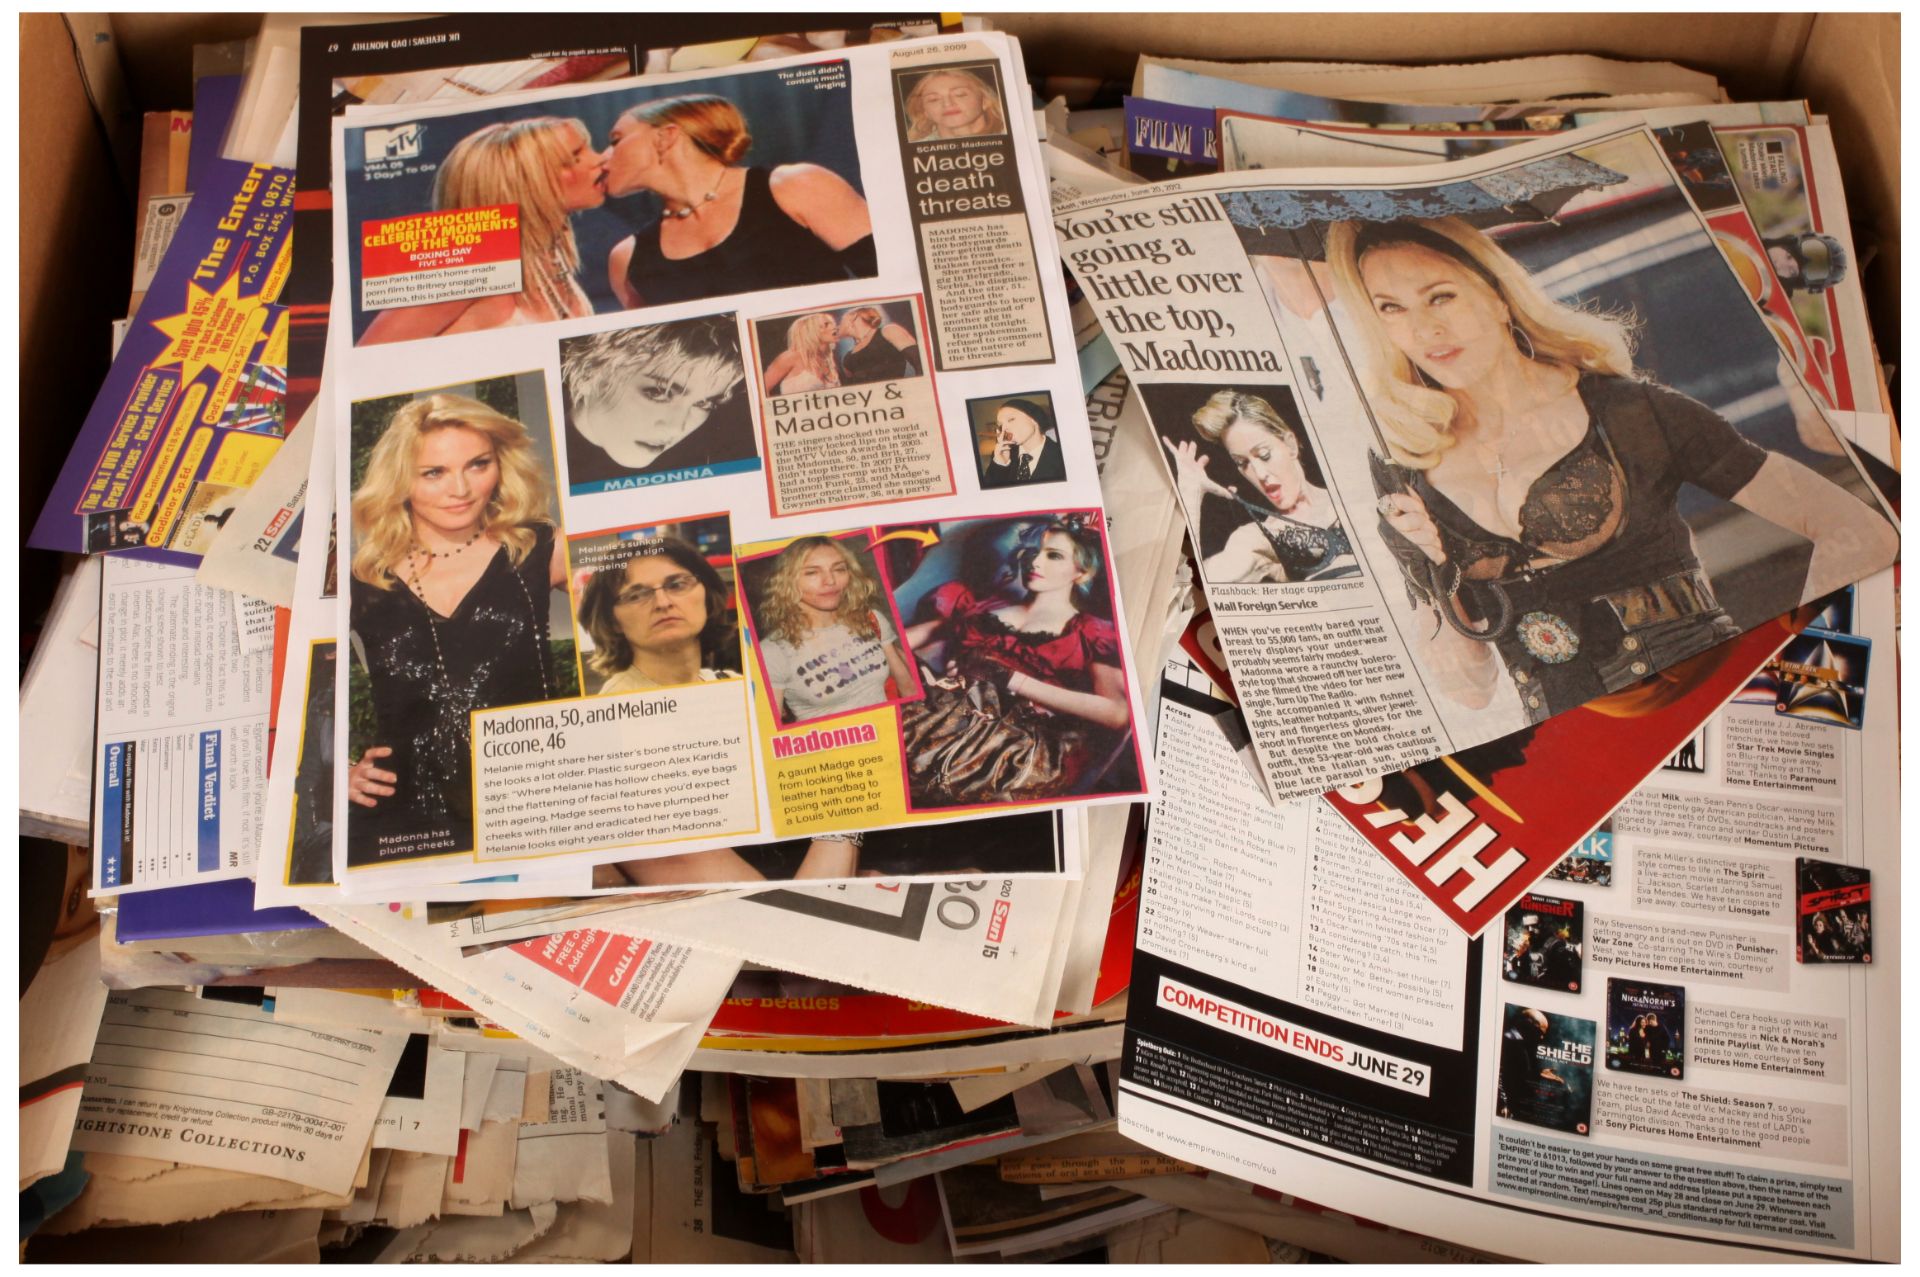 Madonna Related Magazine and Newspaper Clippings